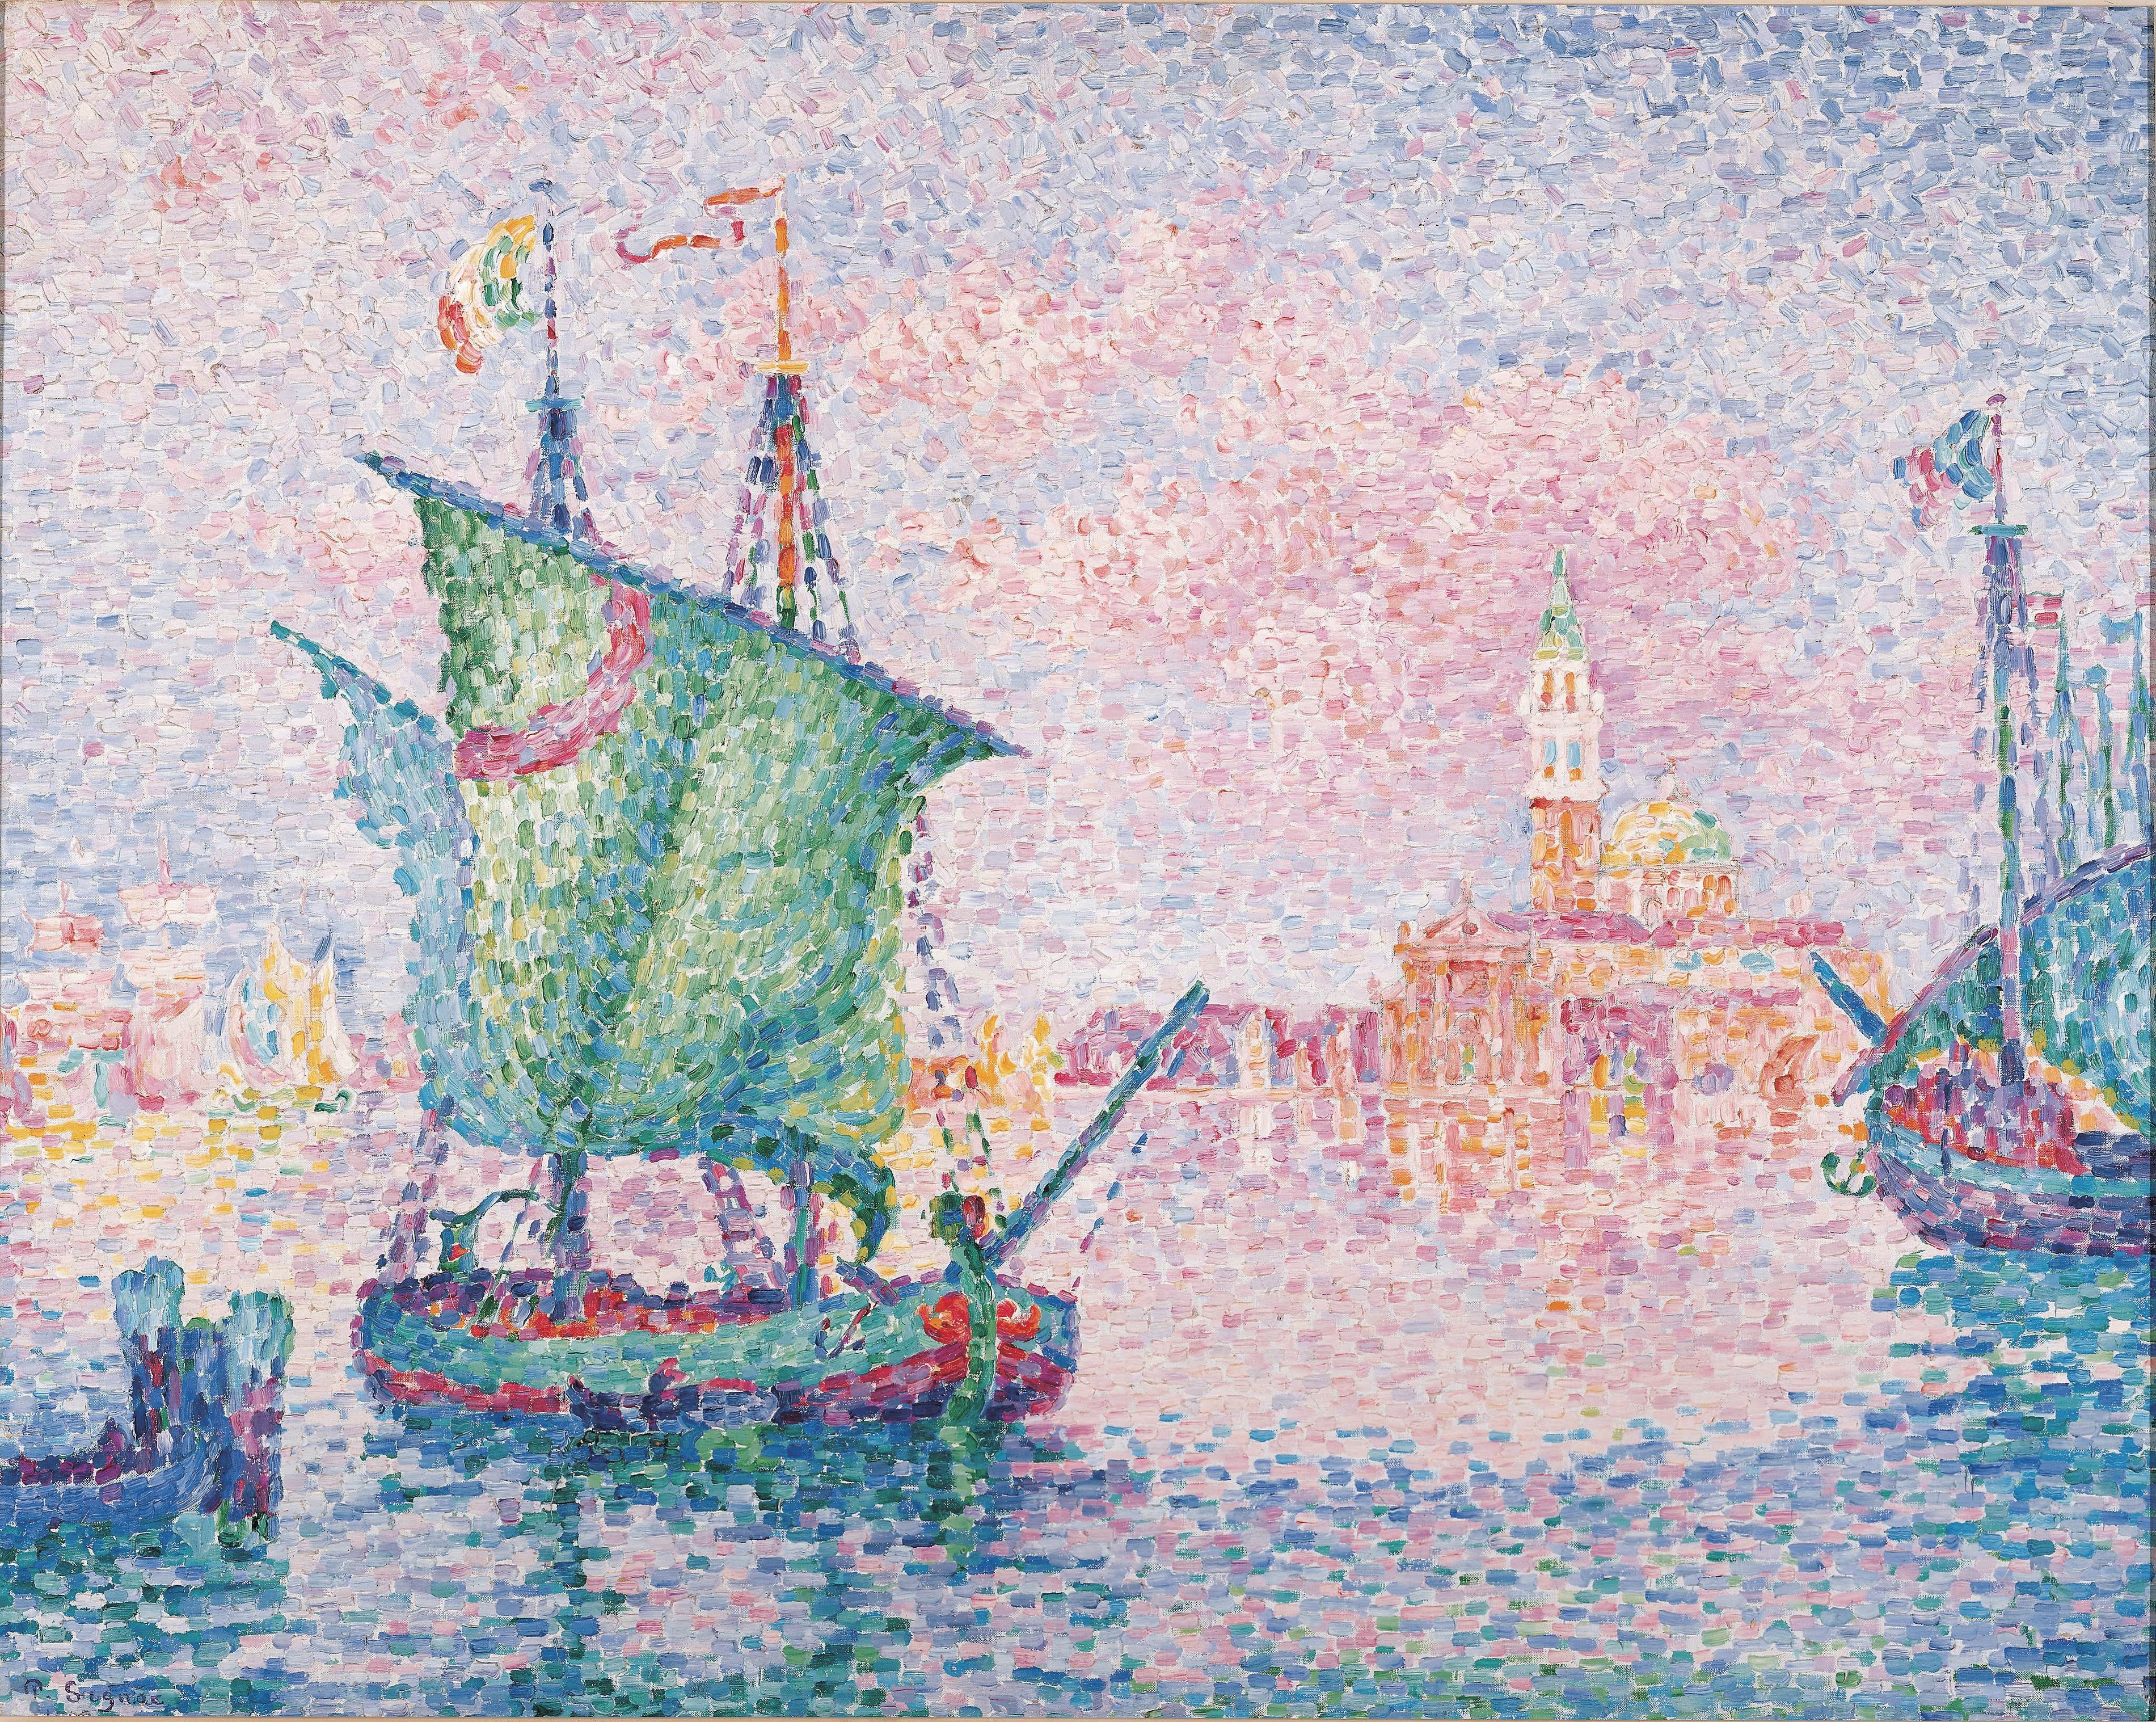 Oil On Canvas Oil Painting Paul Signac Venice Artwork Classical Art Water Boat Ship 3801x3035